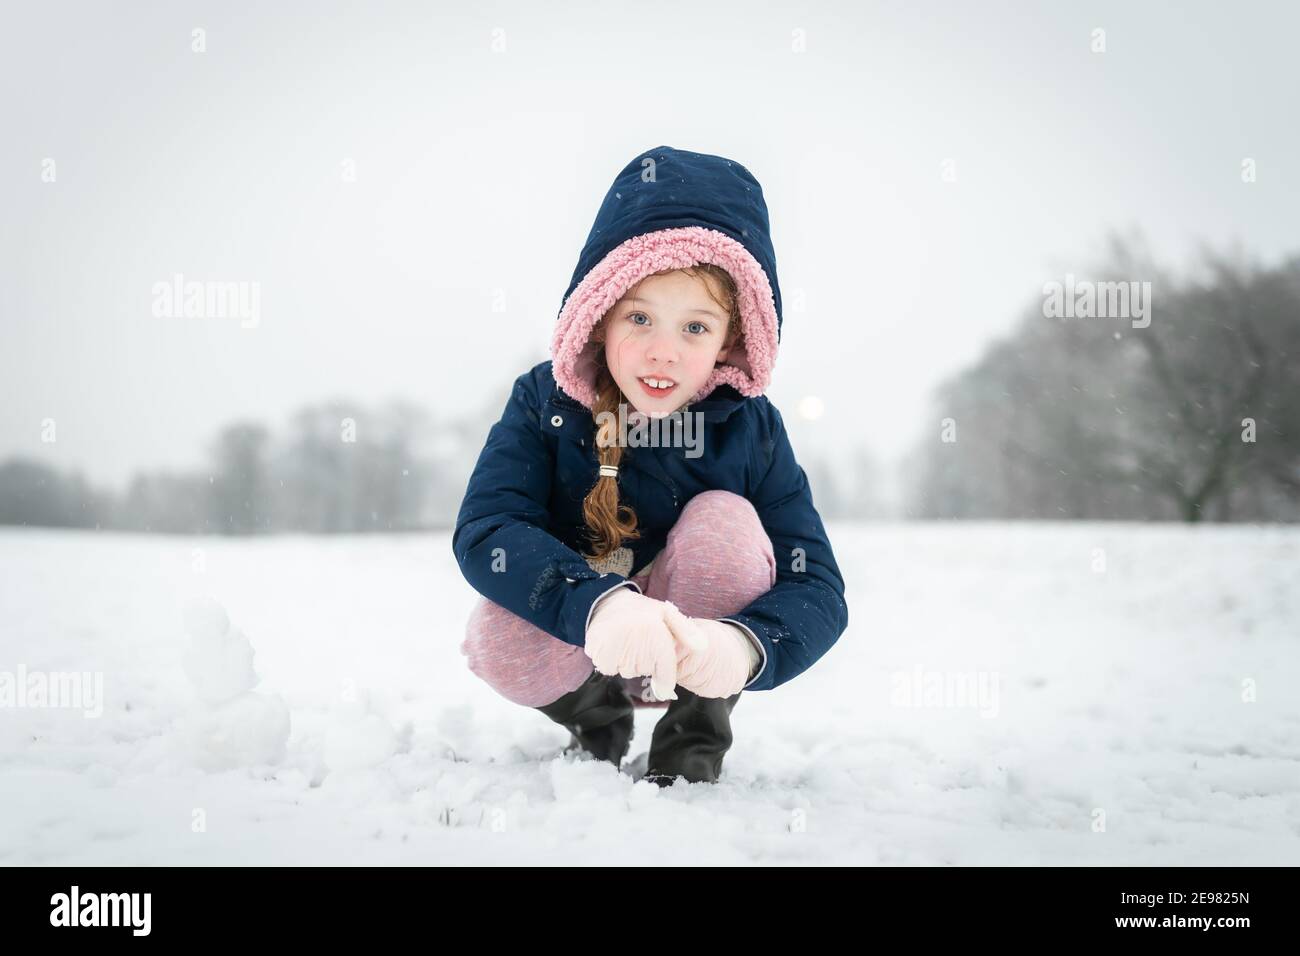 Beautiful young girl smiling happy playing outside in falling snow looking at camera wrapped up warm with blue coat hood up gloves and boots snowfall Stock Photo